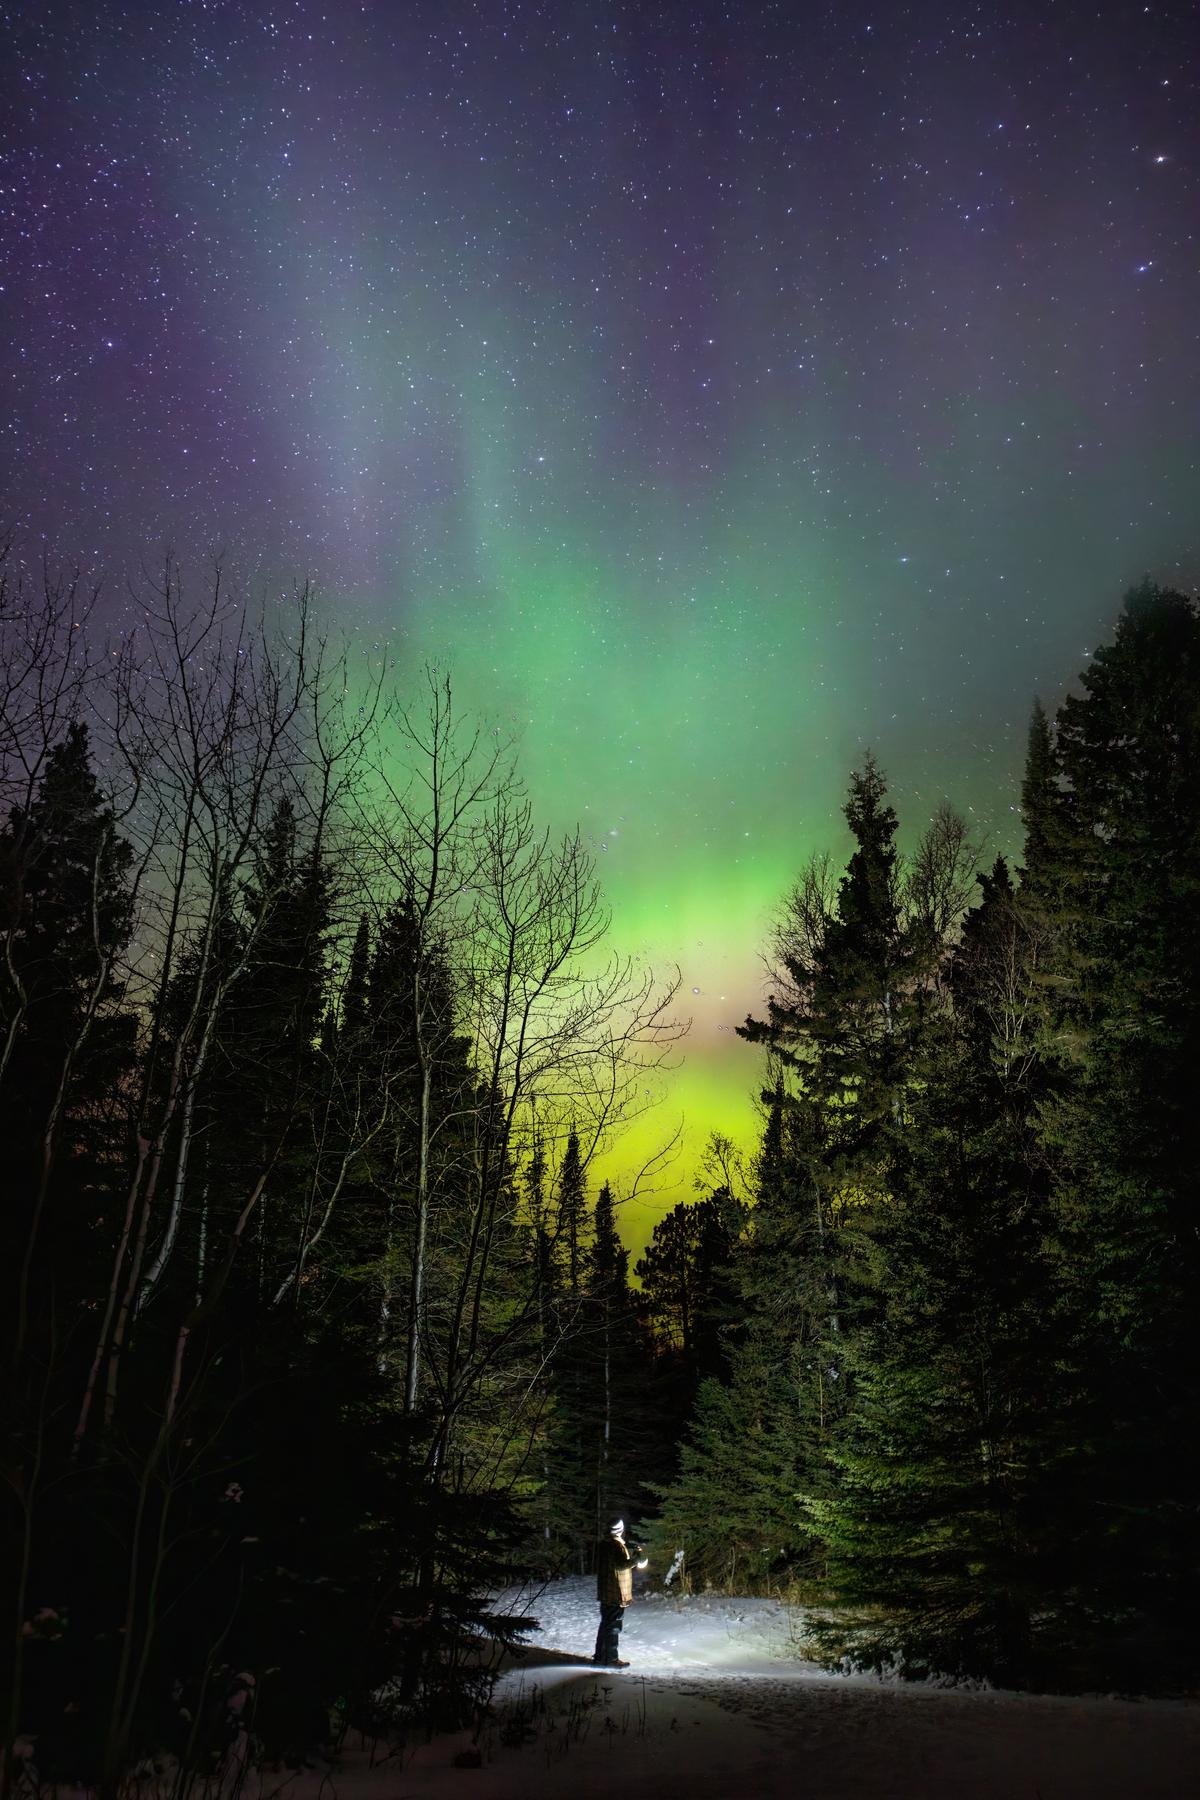 Auroras over the woods photographed by Narog. (Courtesy of <a href="https://www.instagram.com/nicholas_j._narog_photography/">Nicholas J. Narog Photography</a>)